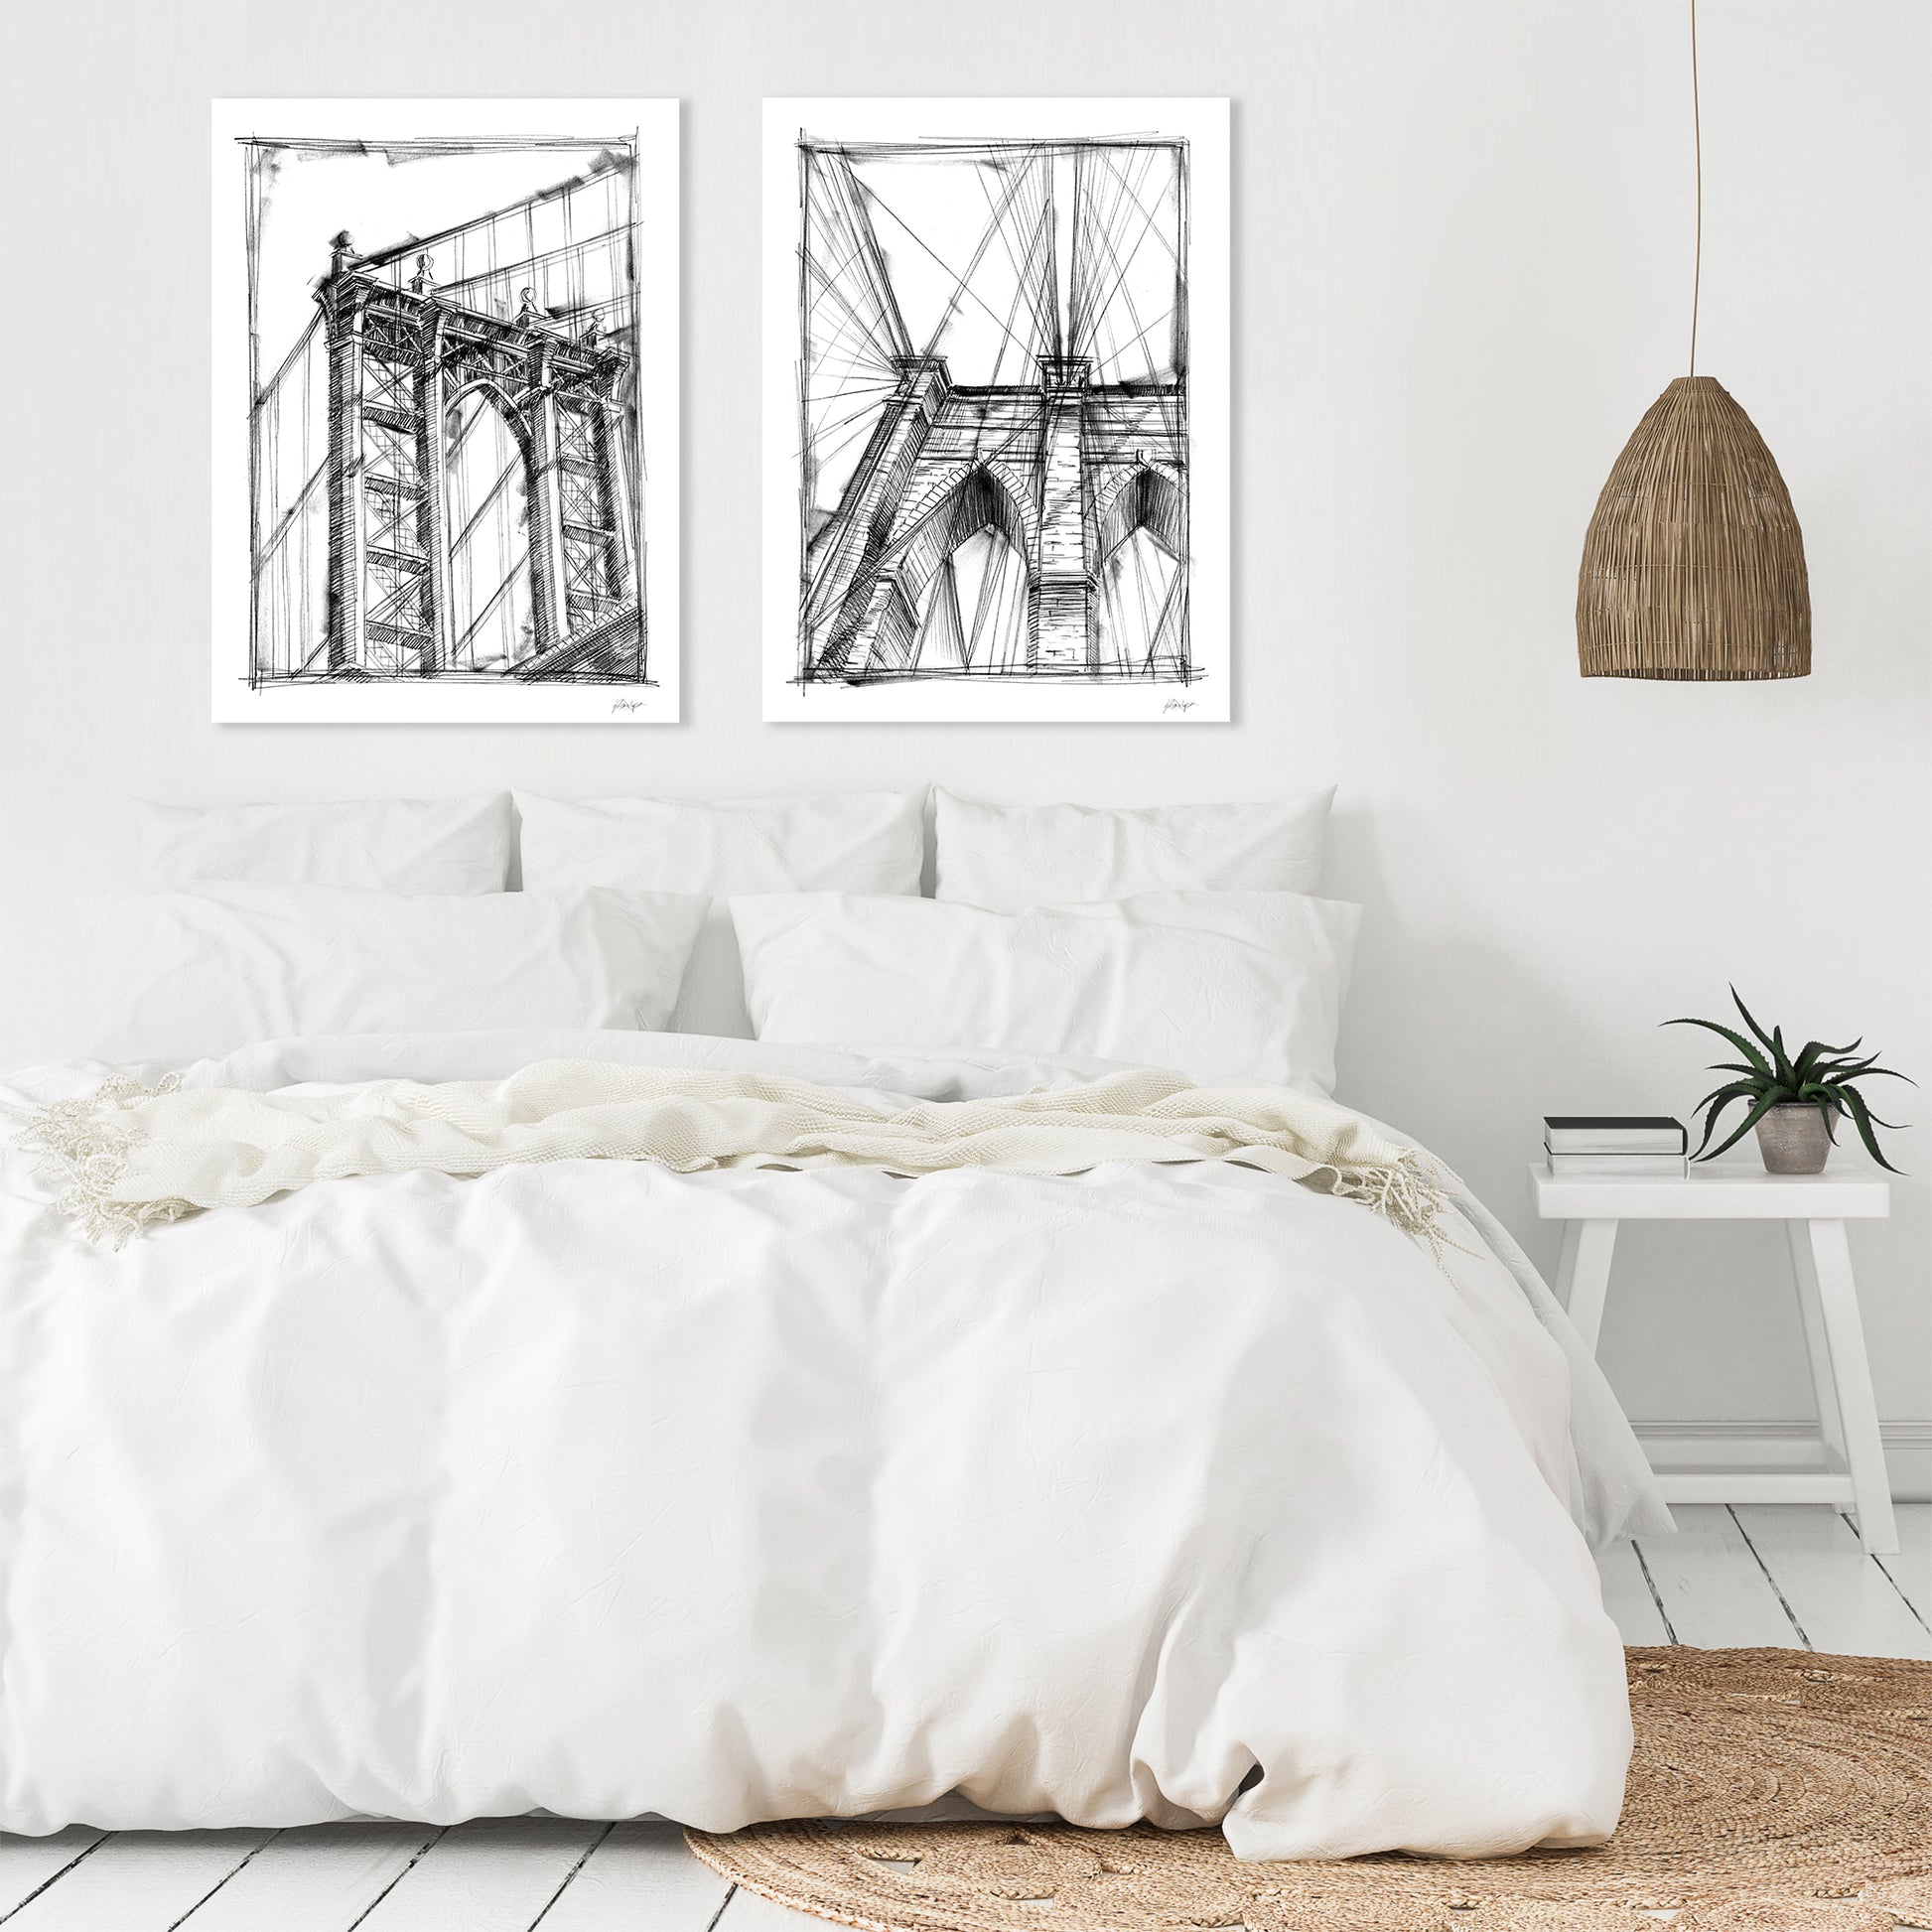 Graphic Architectural Study by World Art Group - 2 Piece Wrapped Canvas Set